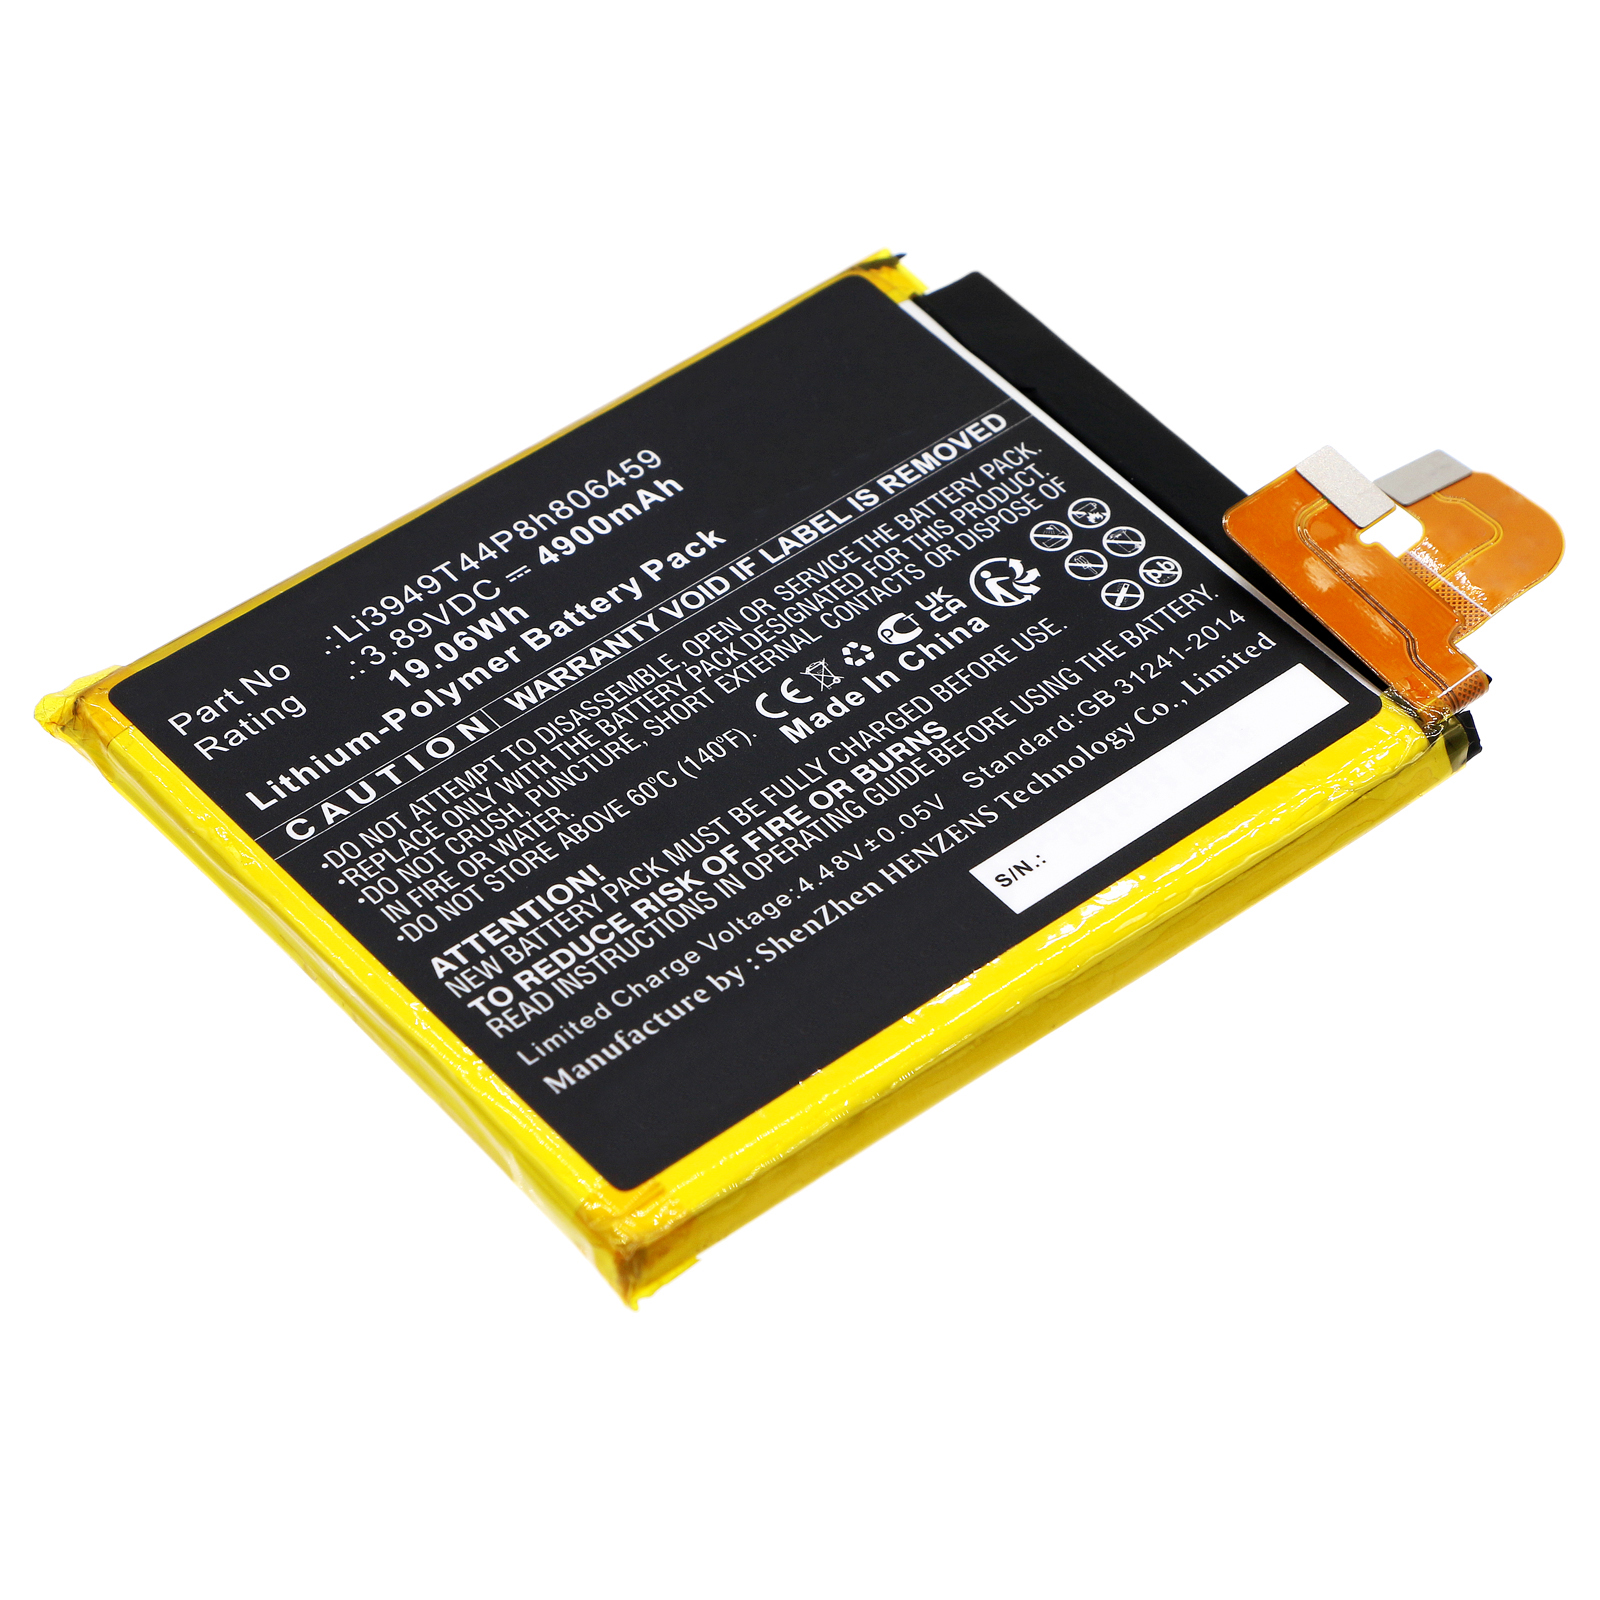 Synergy Digital Cell Phone Battery, Compatible with ZTE Li3949T44P8h806459 Cell Phone Battery (Li-Pol, 3.89V, 4900mAh)